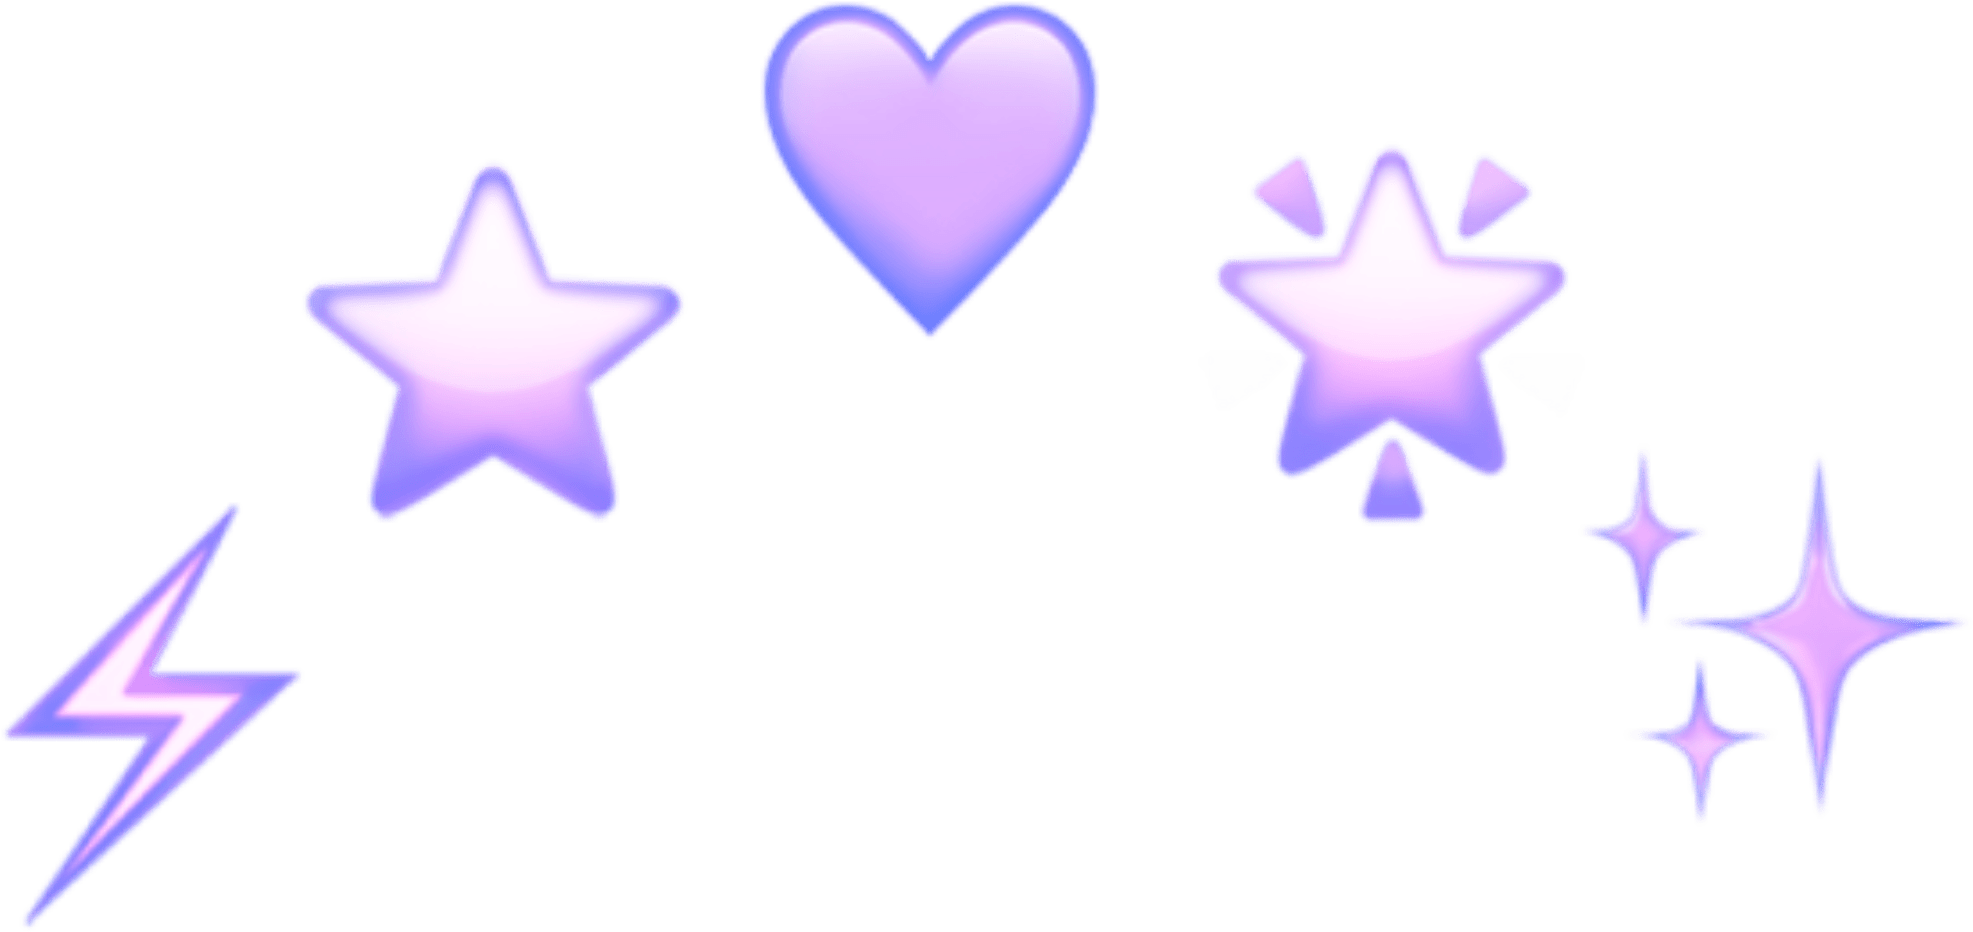 Purple Heartand Stars Graphic PNG image